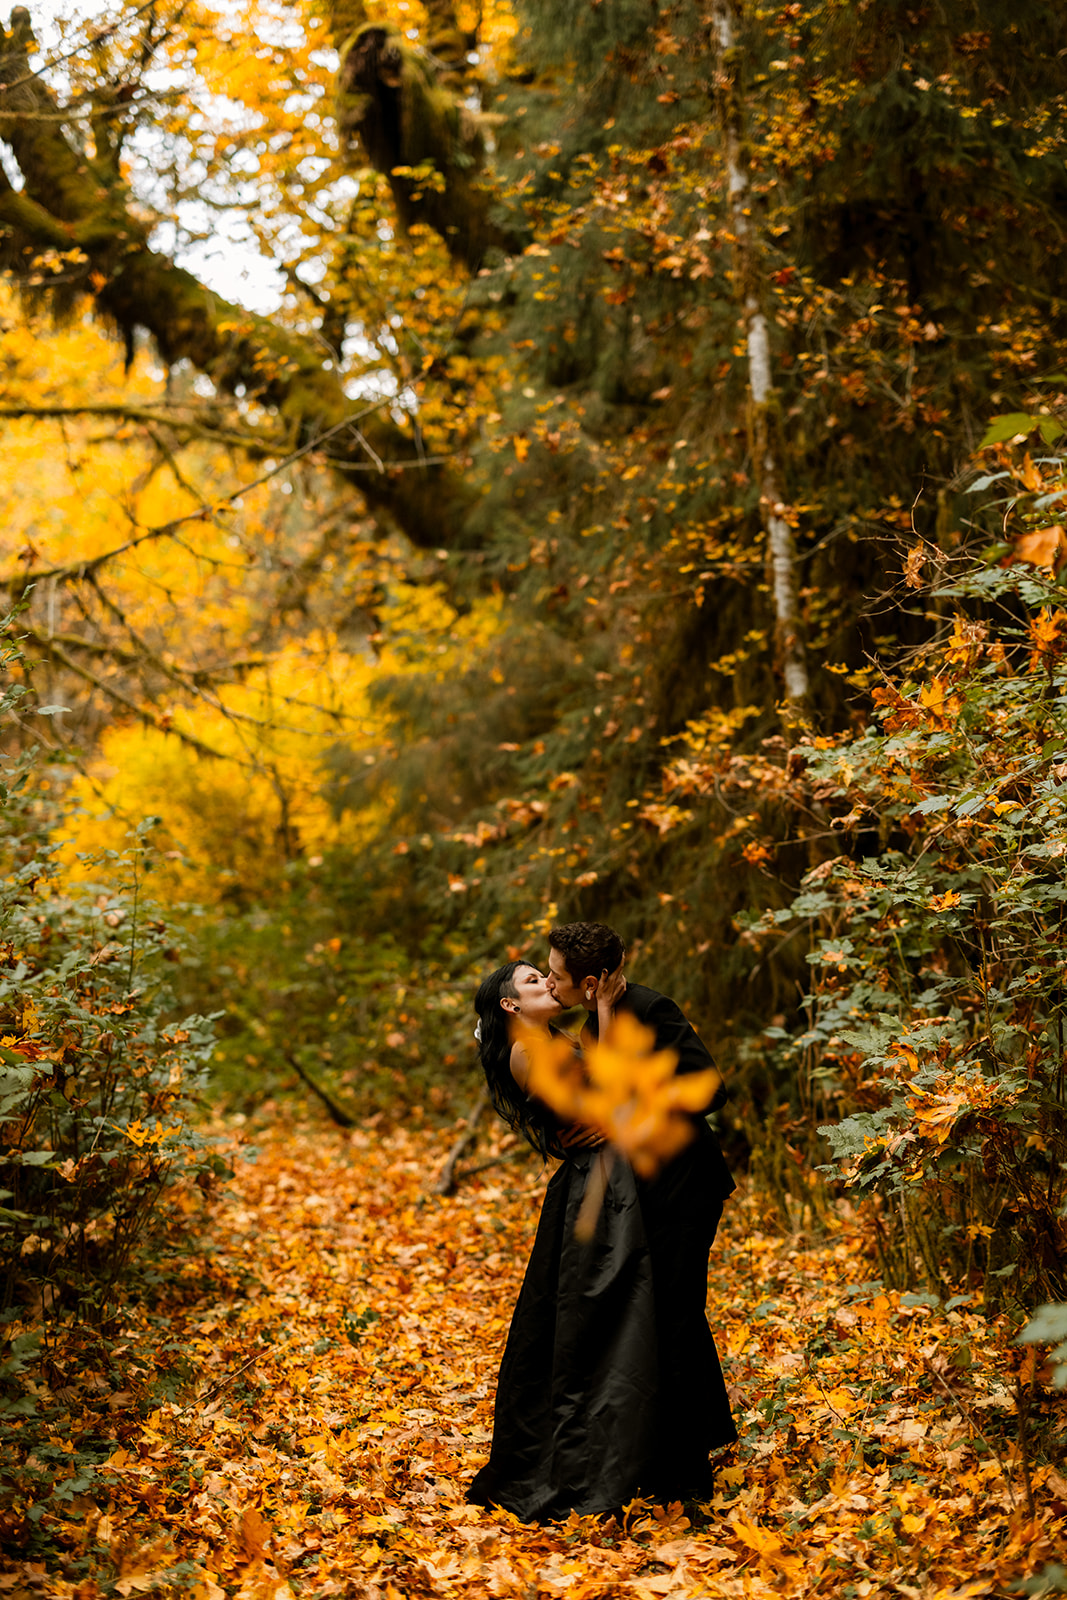 A couple in black elopement outfits share a dip kiss, as orange leaves fall and cover the ground.